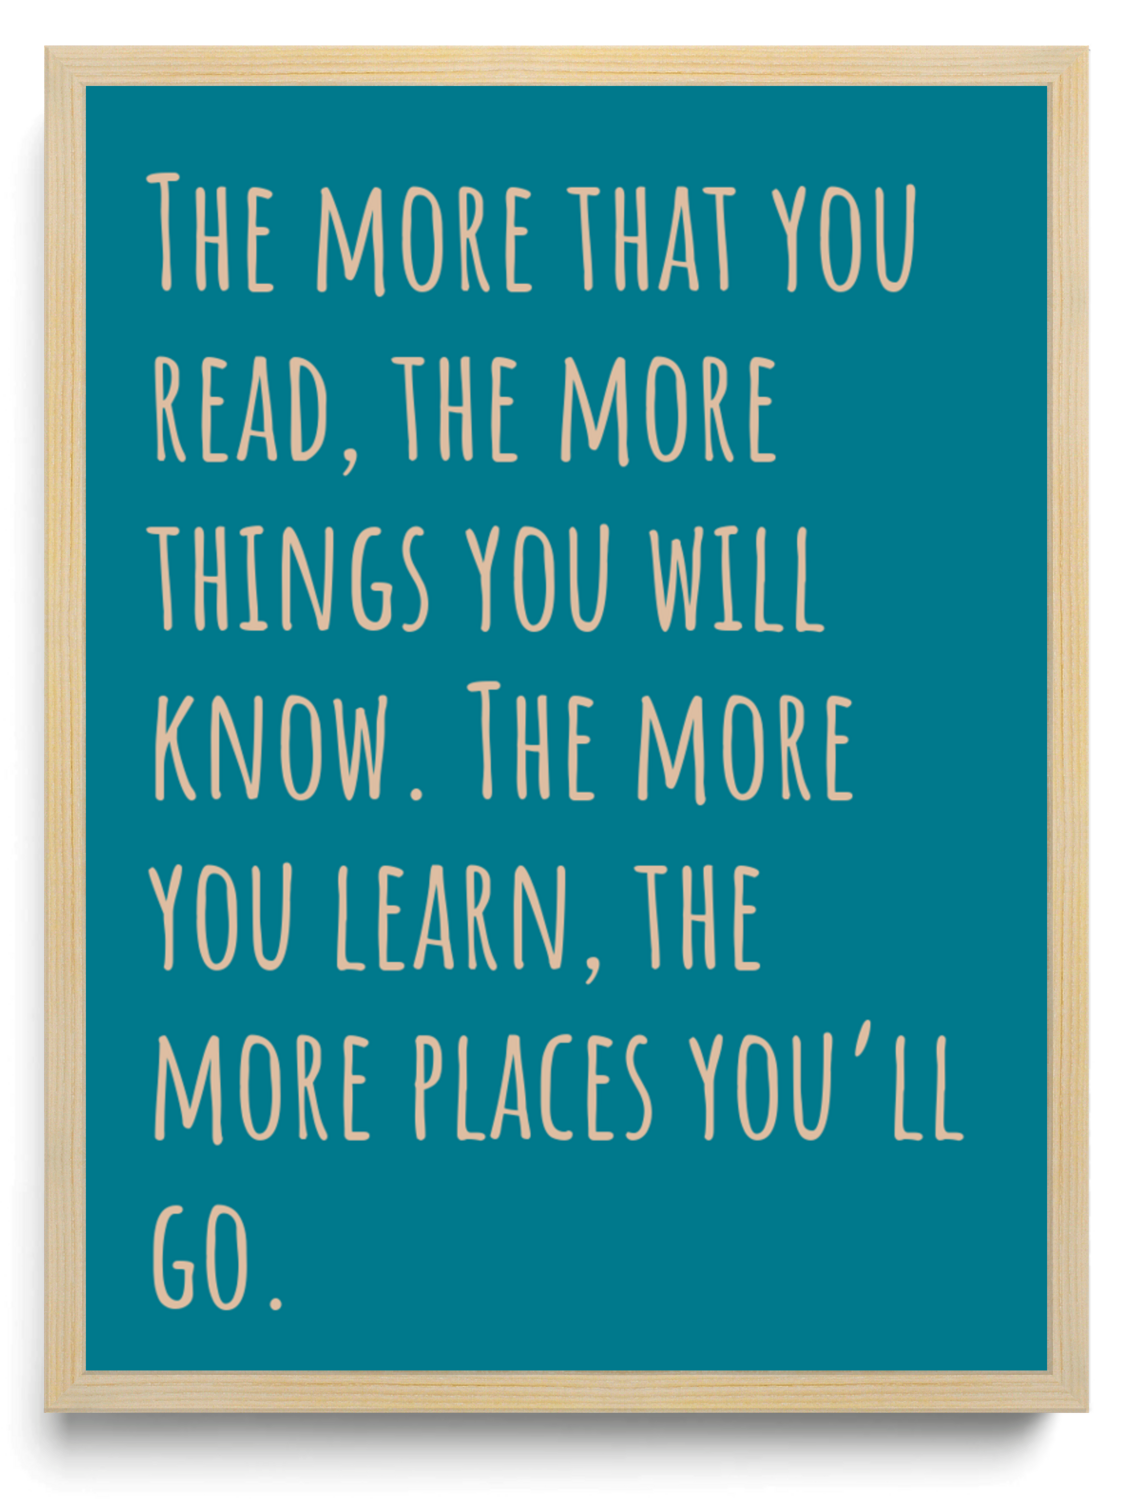 The more that you read, the more things you will know. The more you learn, the more places you’ll go. framed typographic print